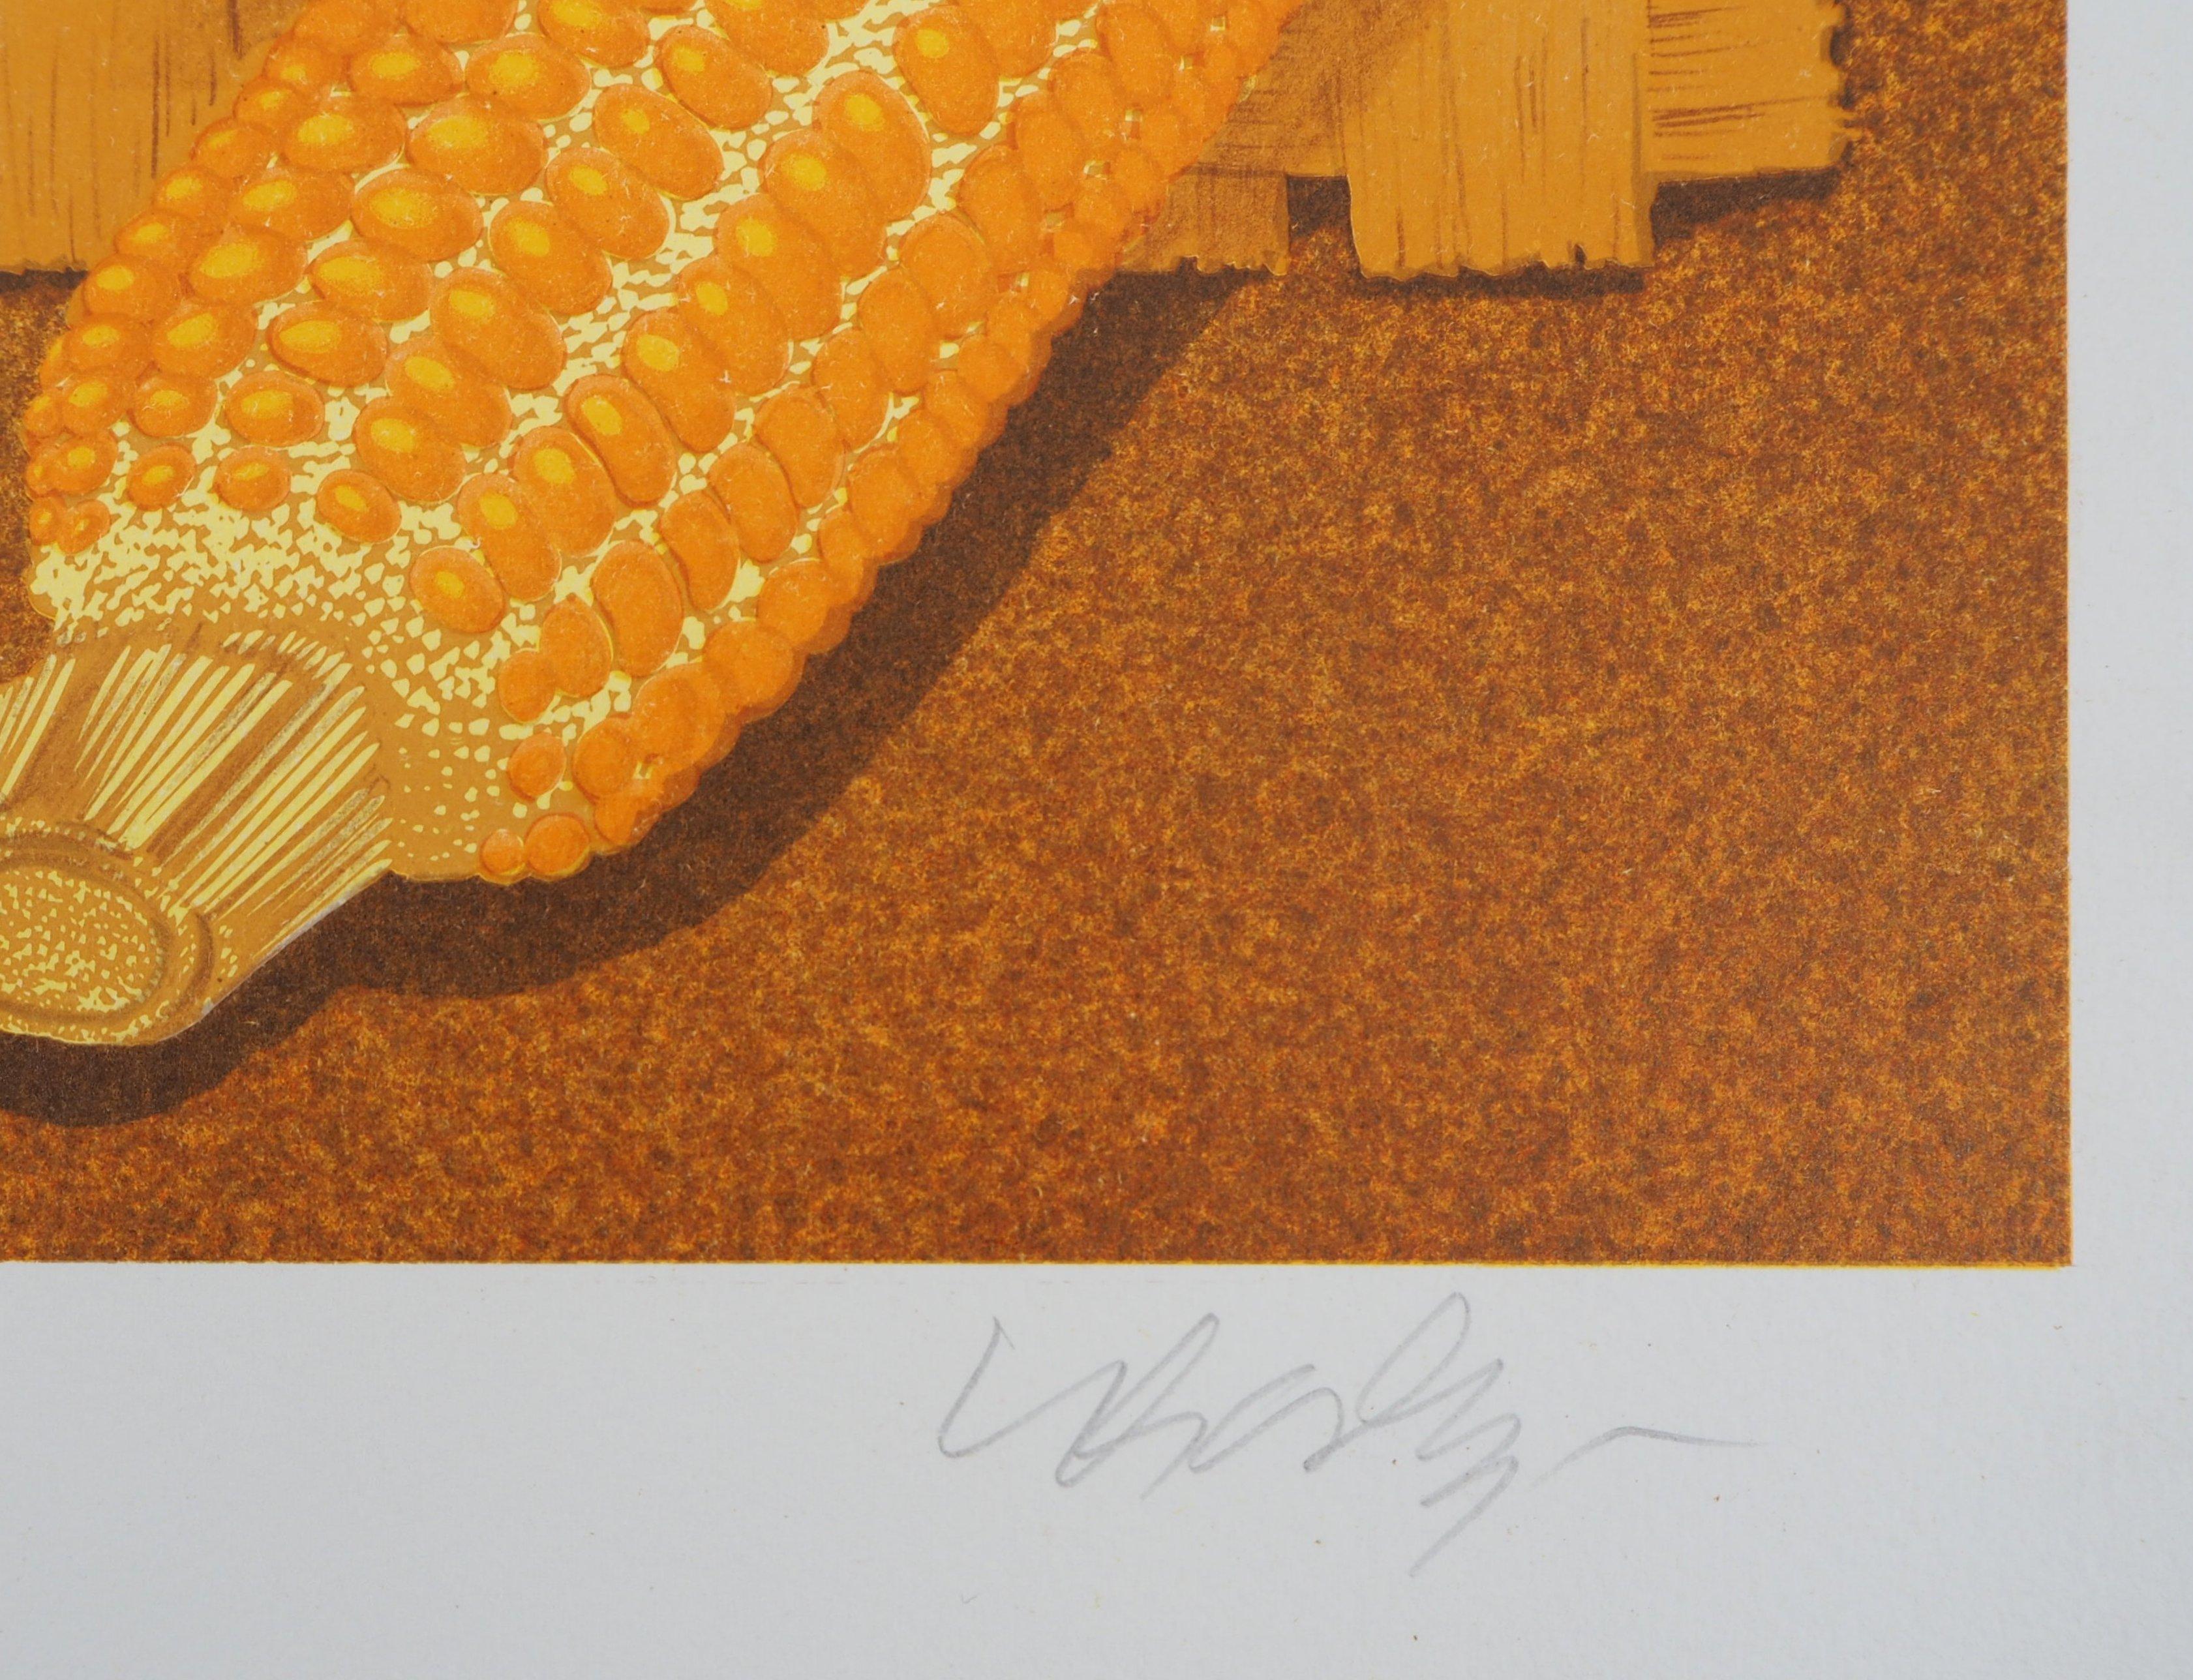 Buddha, Life in Yellow - Handsigned Lithograph, Limited to 250 copies - Print by Victor Vasarely